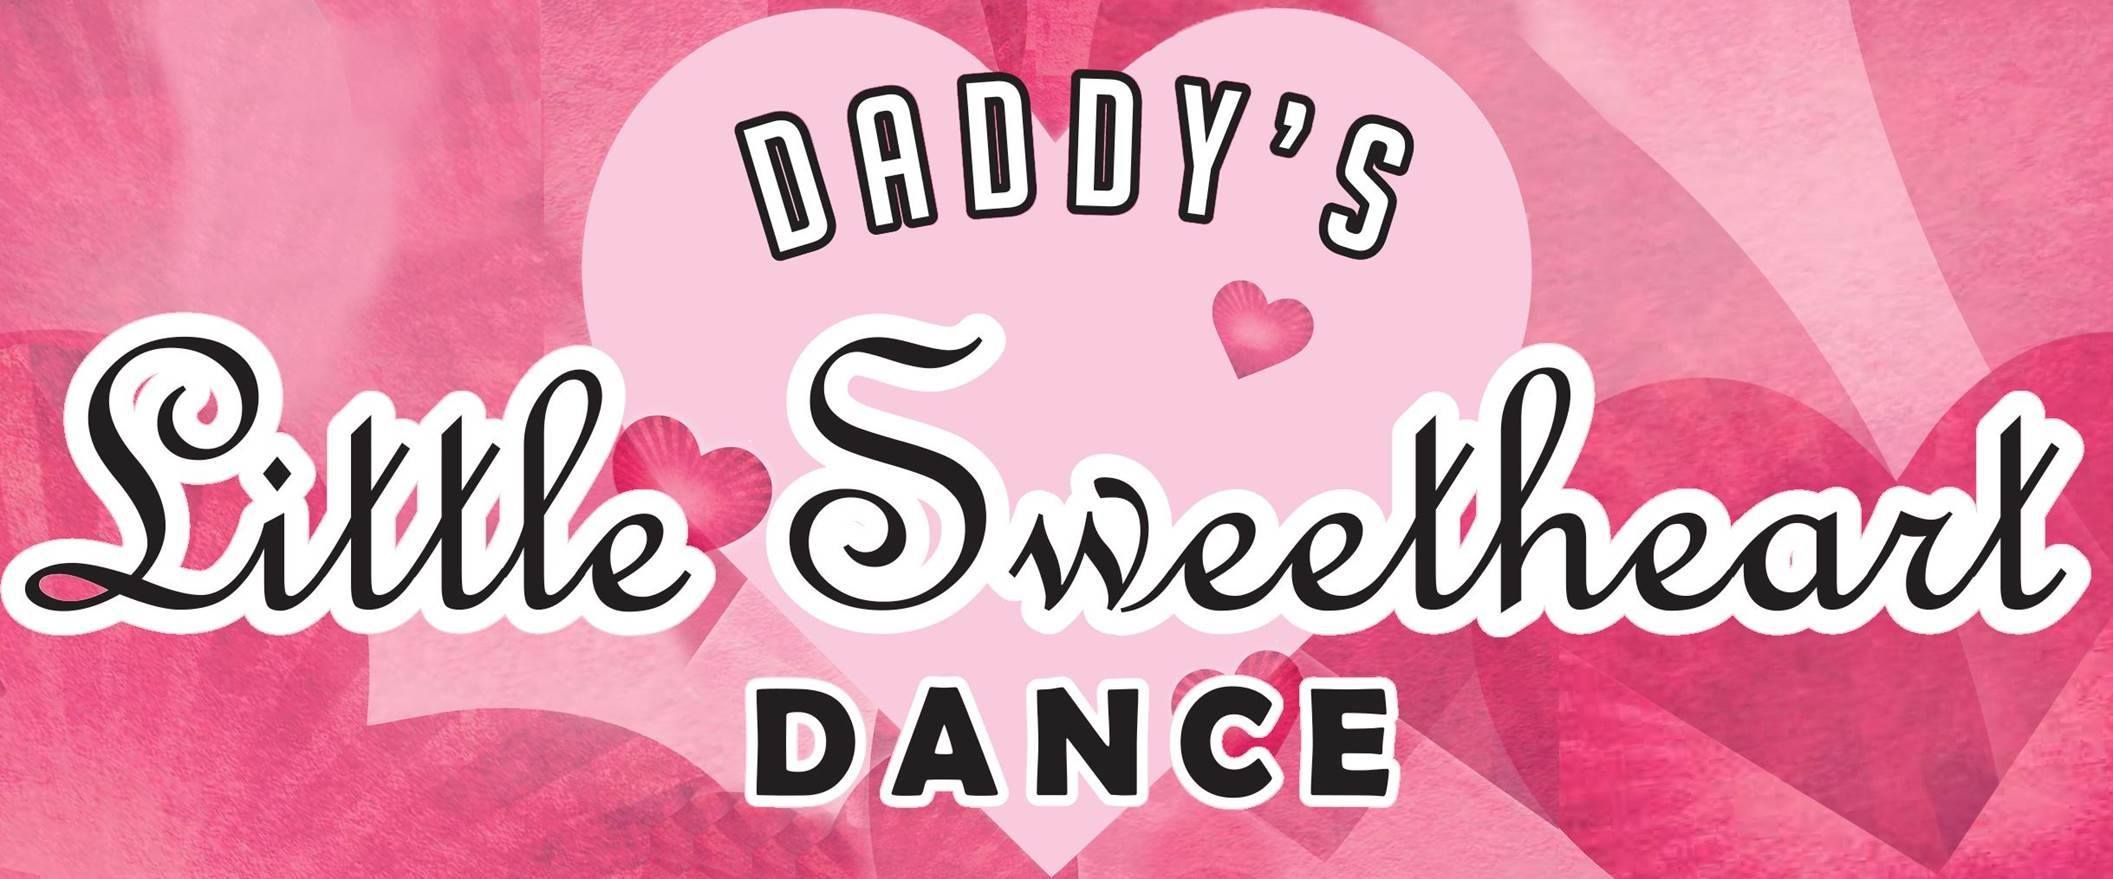 Daddy's Little Sweetheart Dance Event, plano